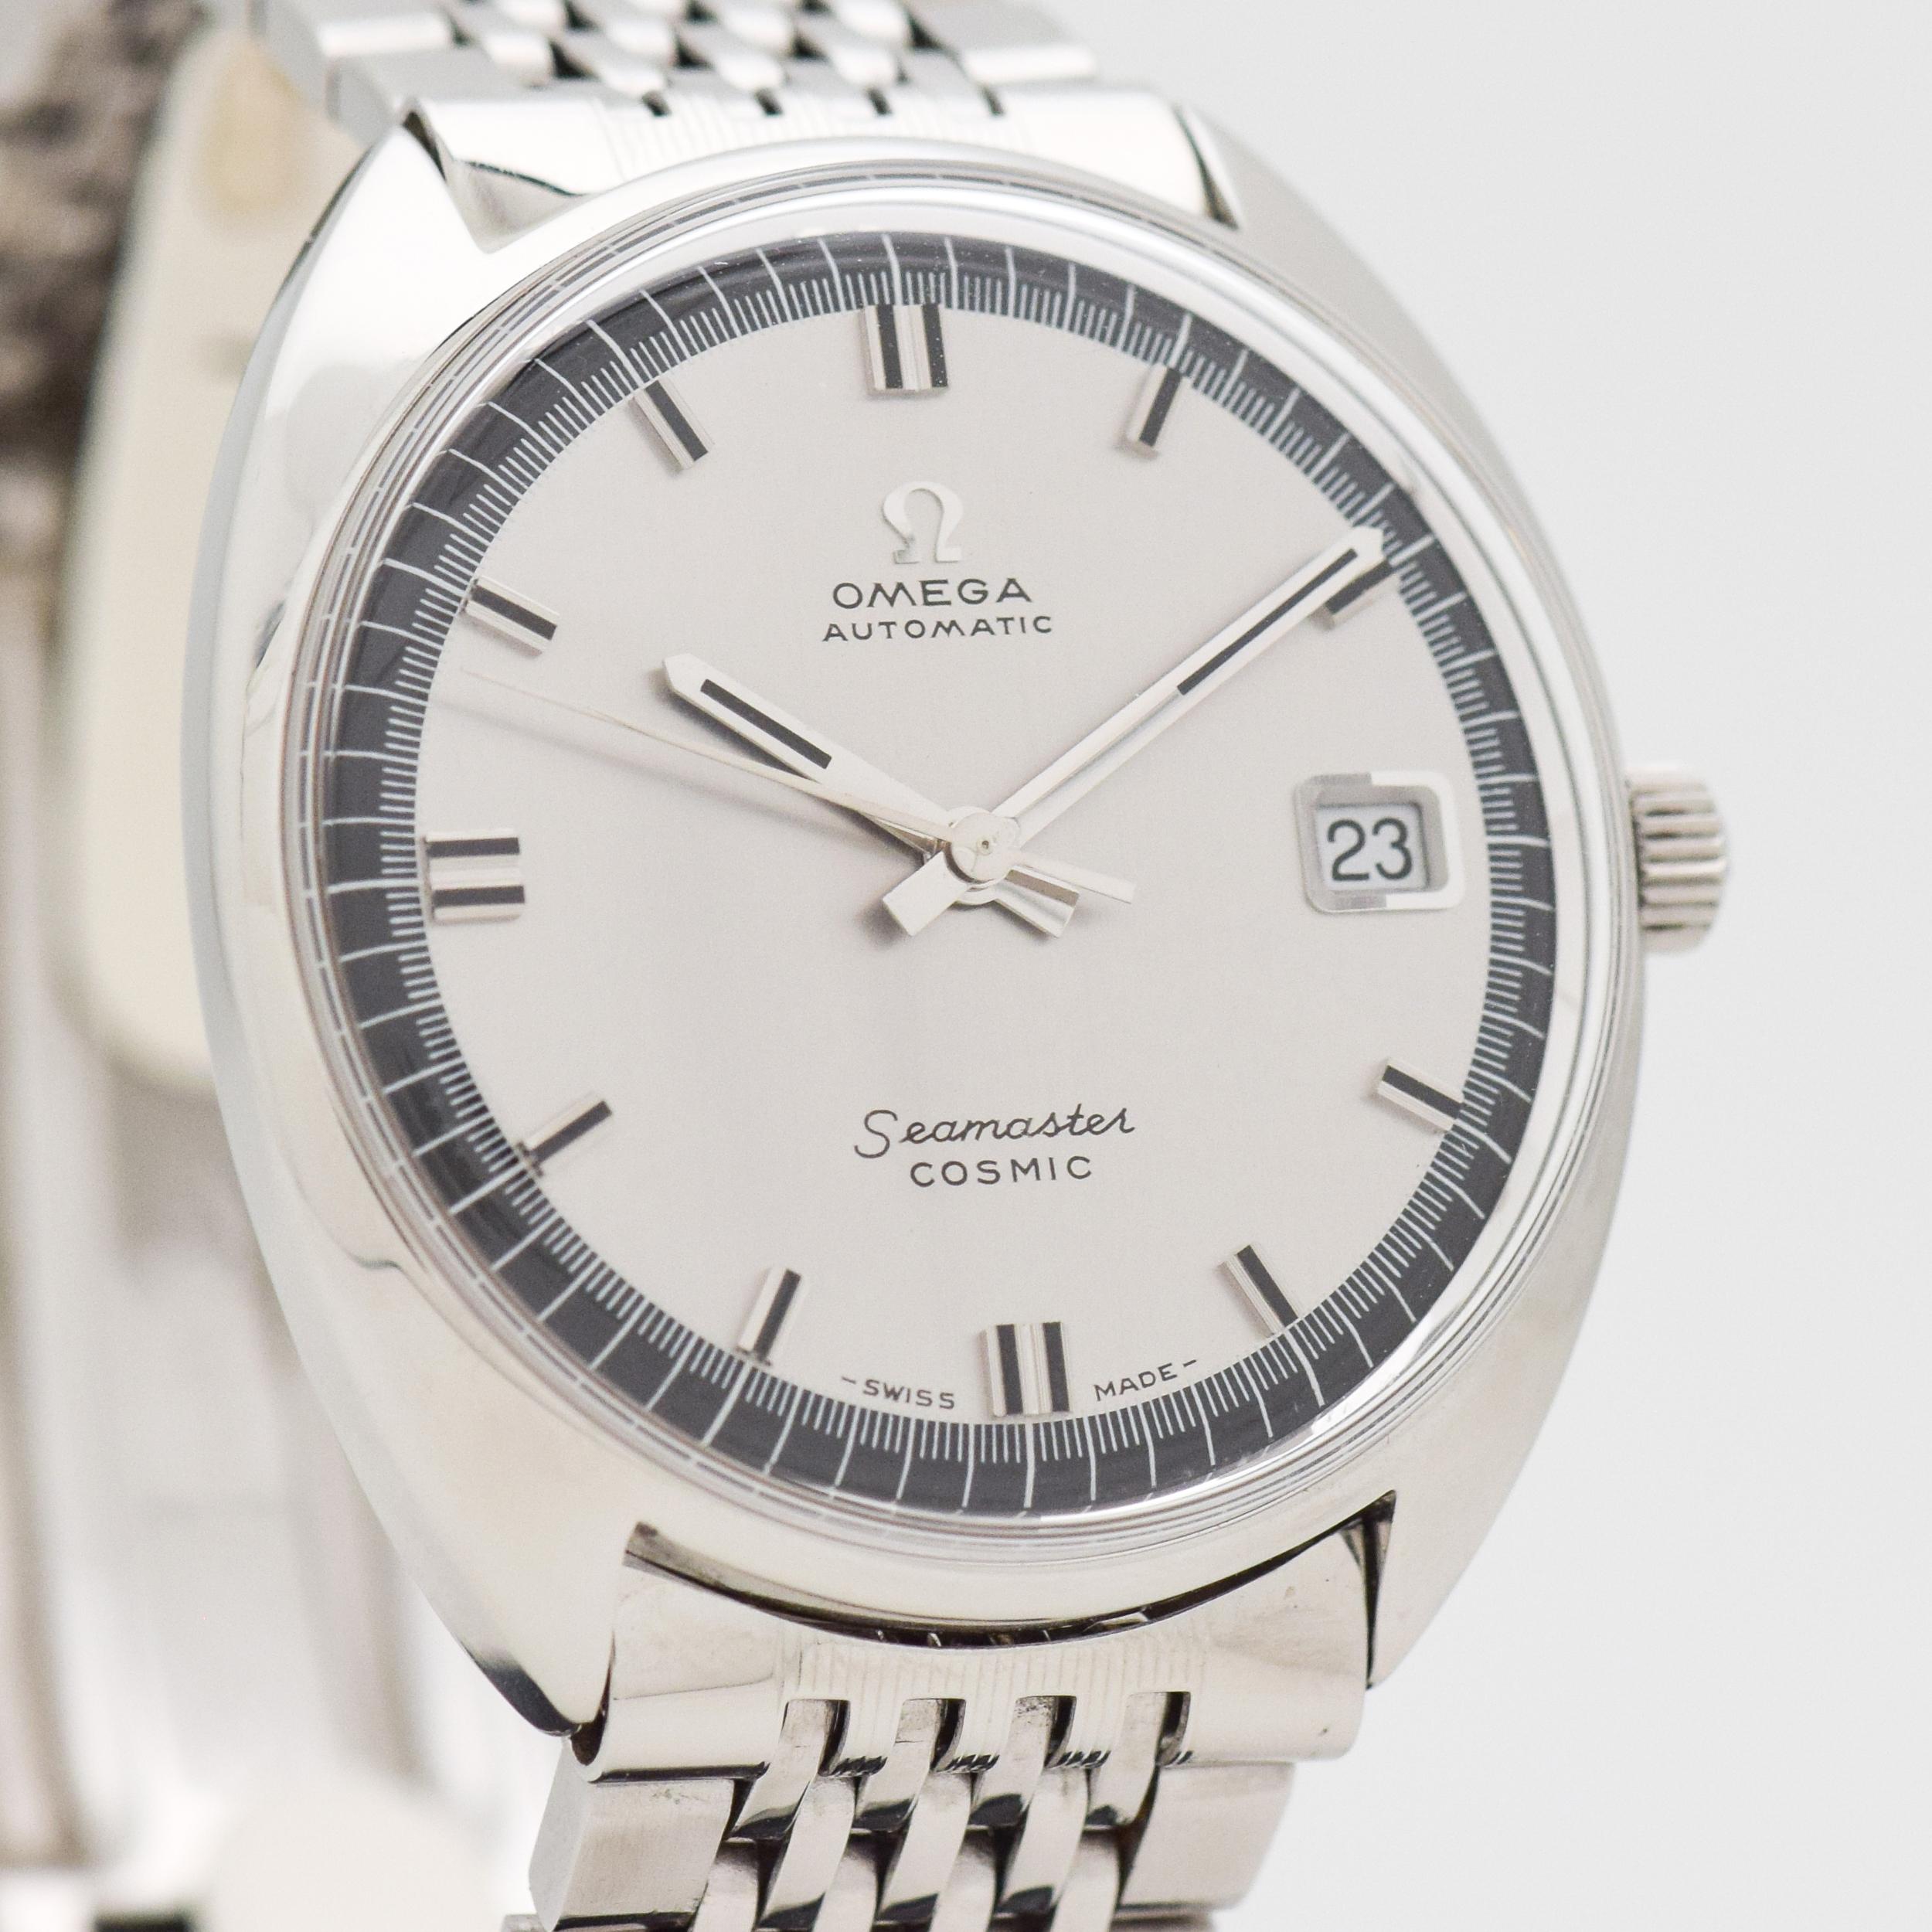 a 1968 Vintage Omega Seamaster Cosmic. Reference 166.026. Stainless Steel, C-shaped watch case. 35mm wide. Original, two-tone: gray & black-colored dial. Equipped with a date function. Powered by a 24-jewel, automatic caliber movement. Featured on